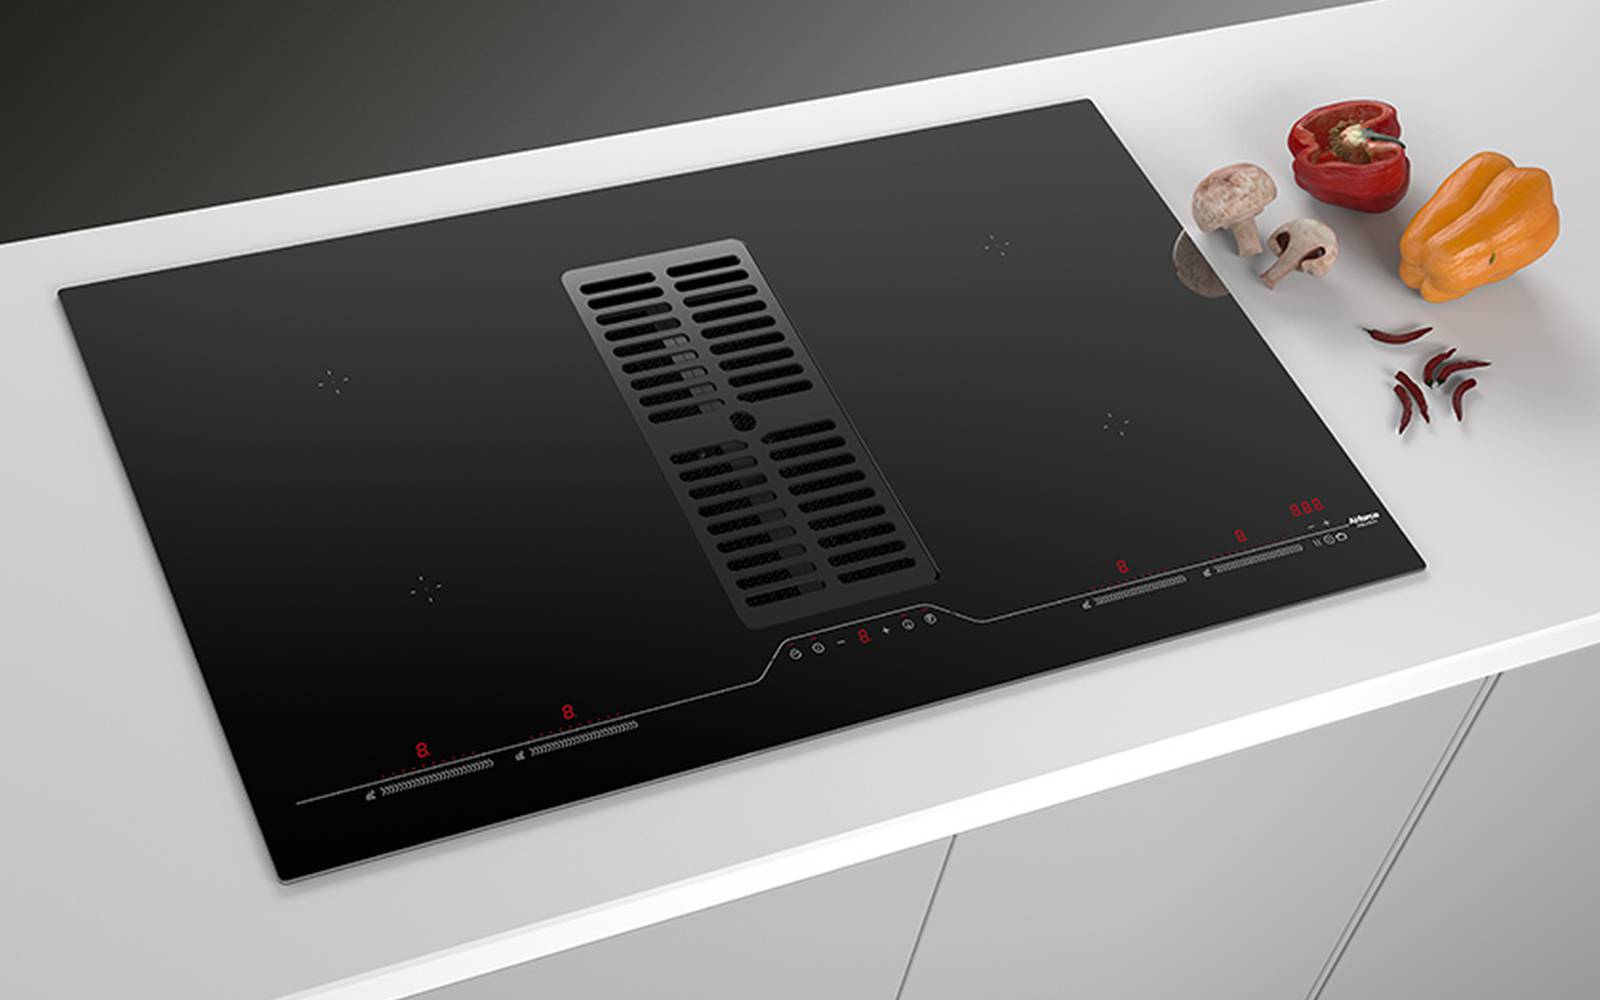 Airforce Aspira Centrale G5 90cm Flex Induction hob with Downdraft